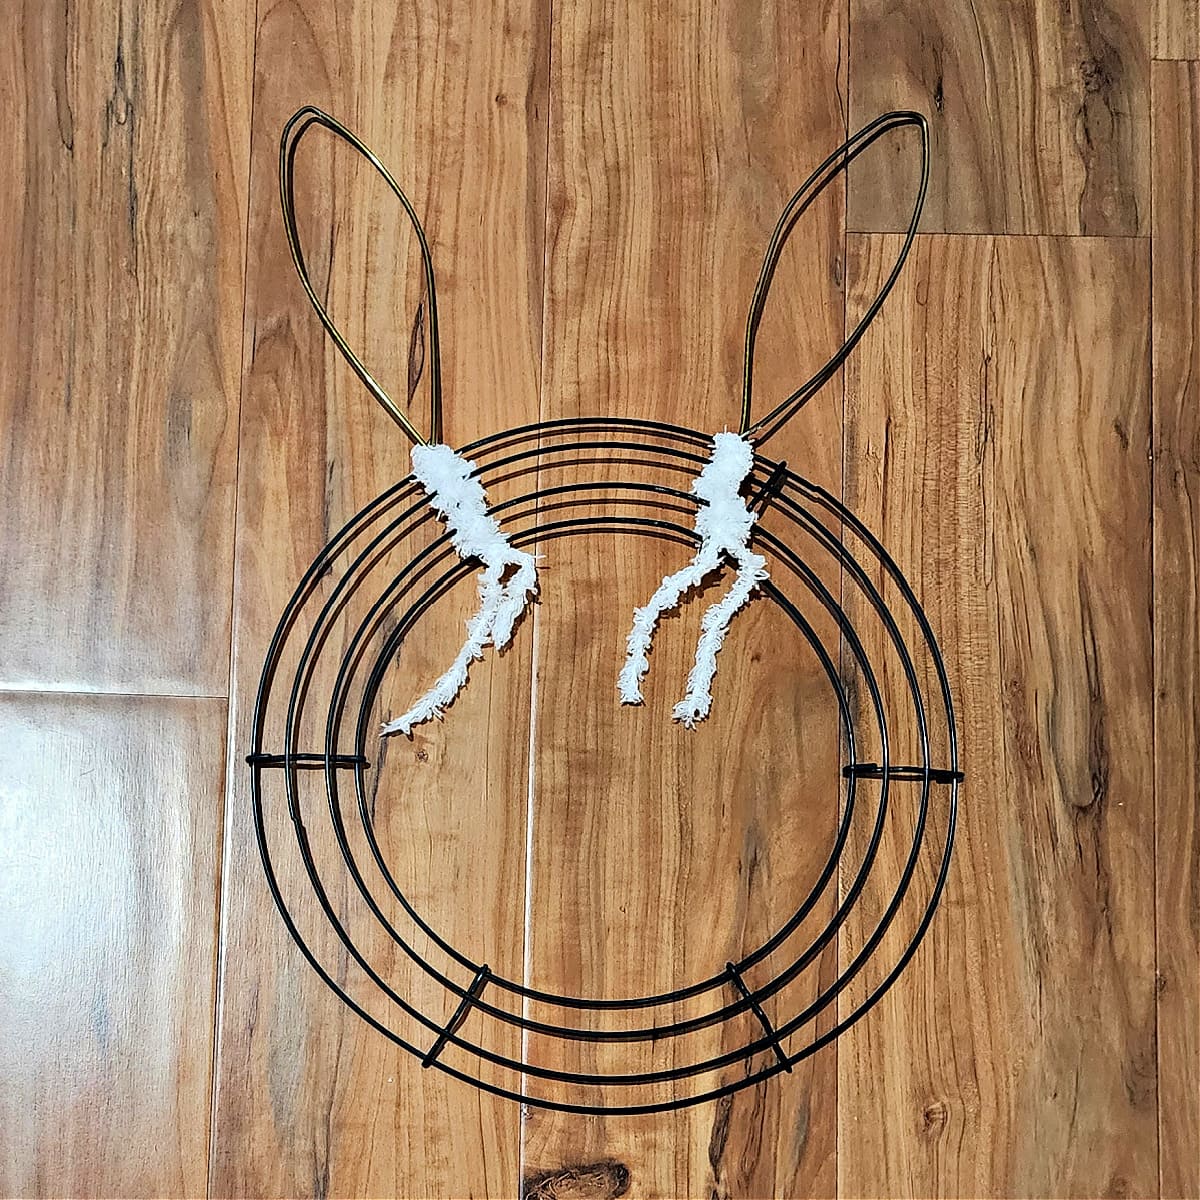 Both bunny ears secured to wire wreath.